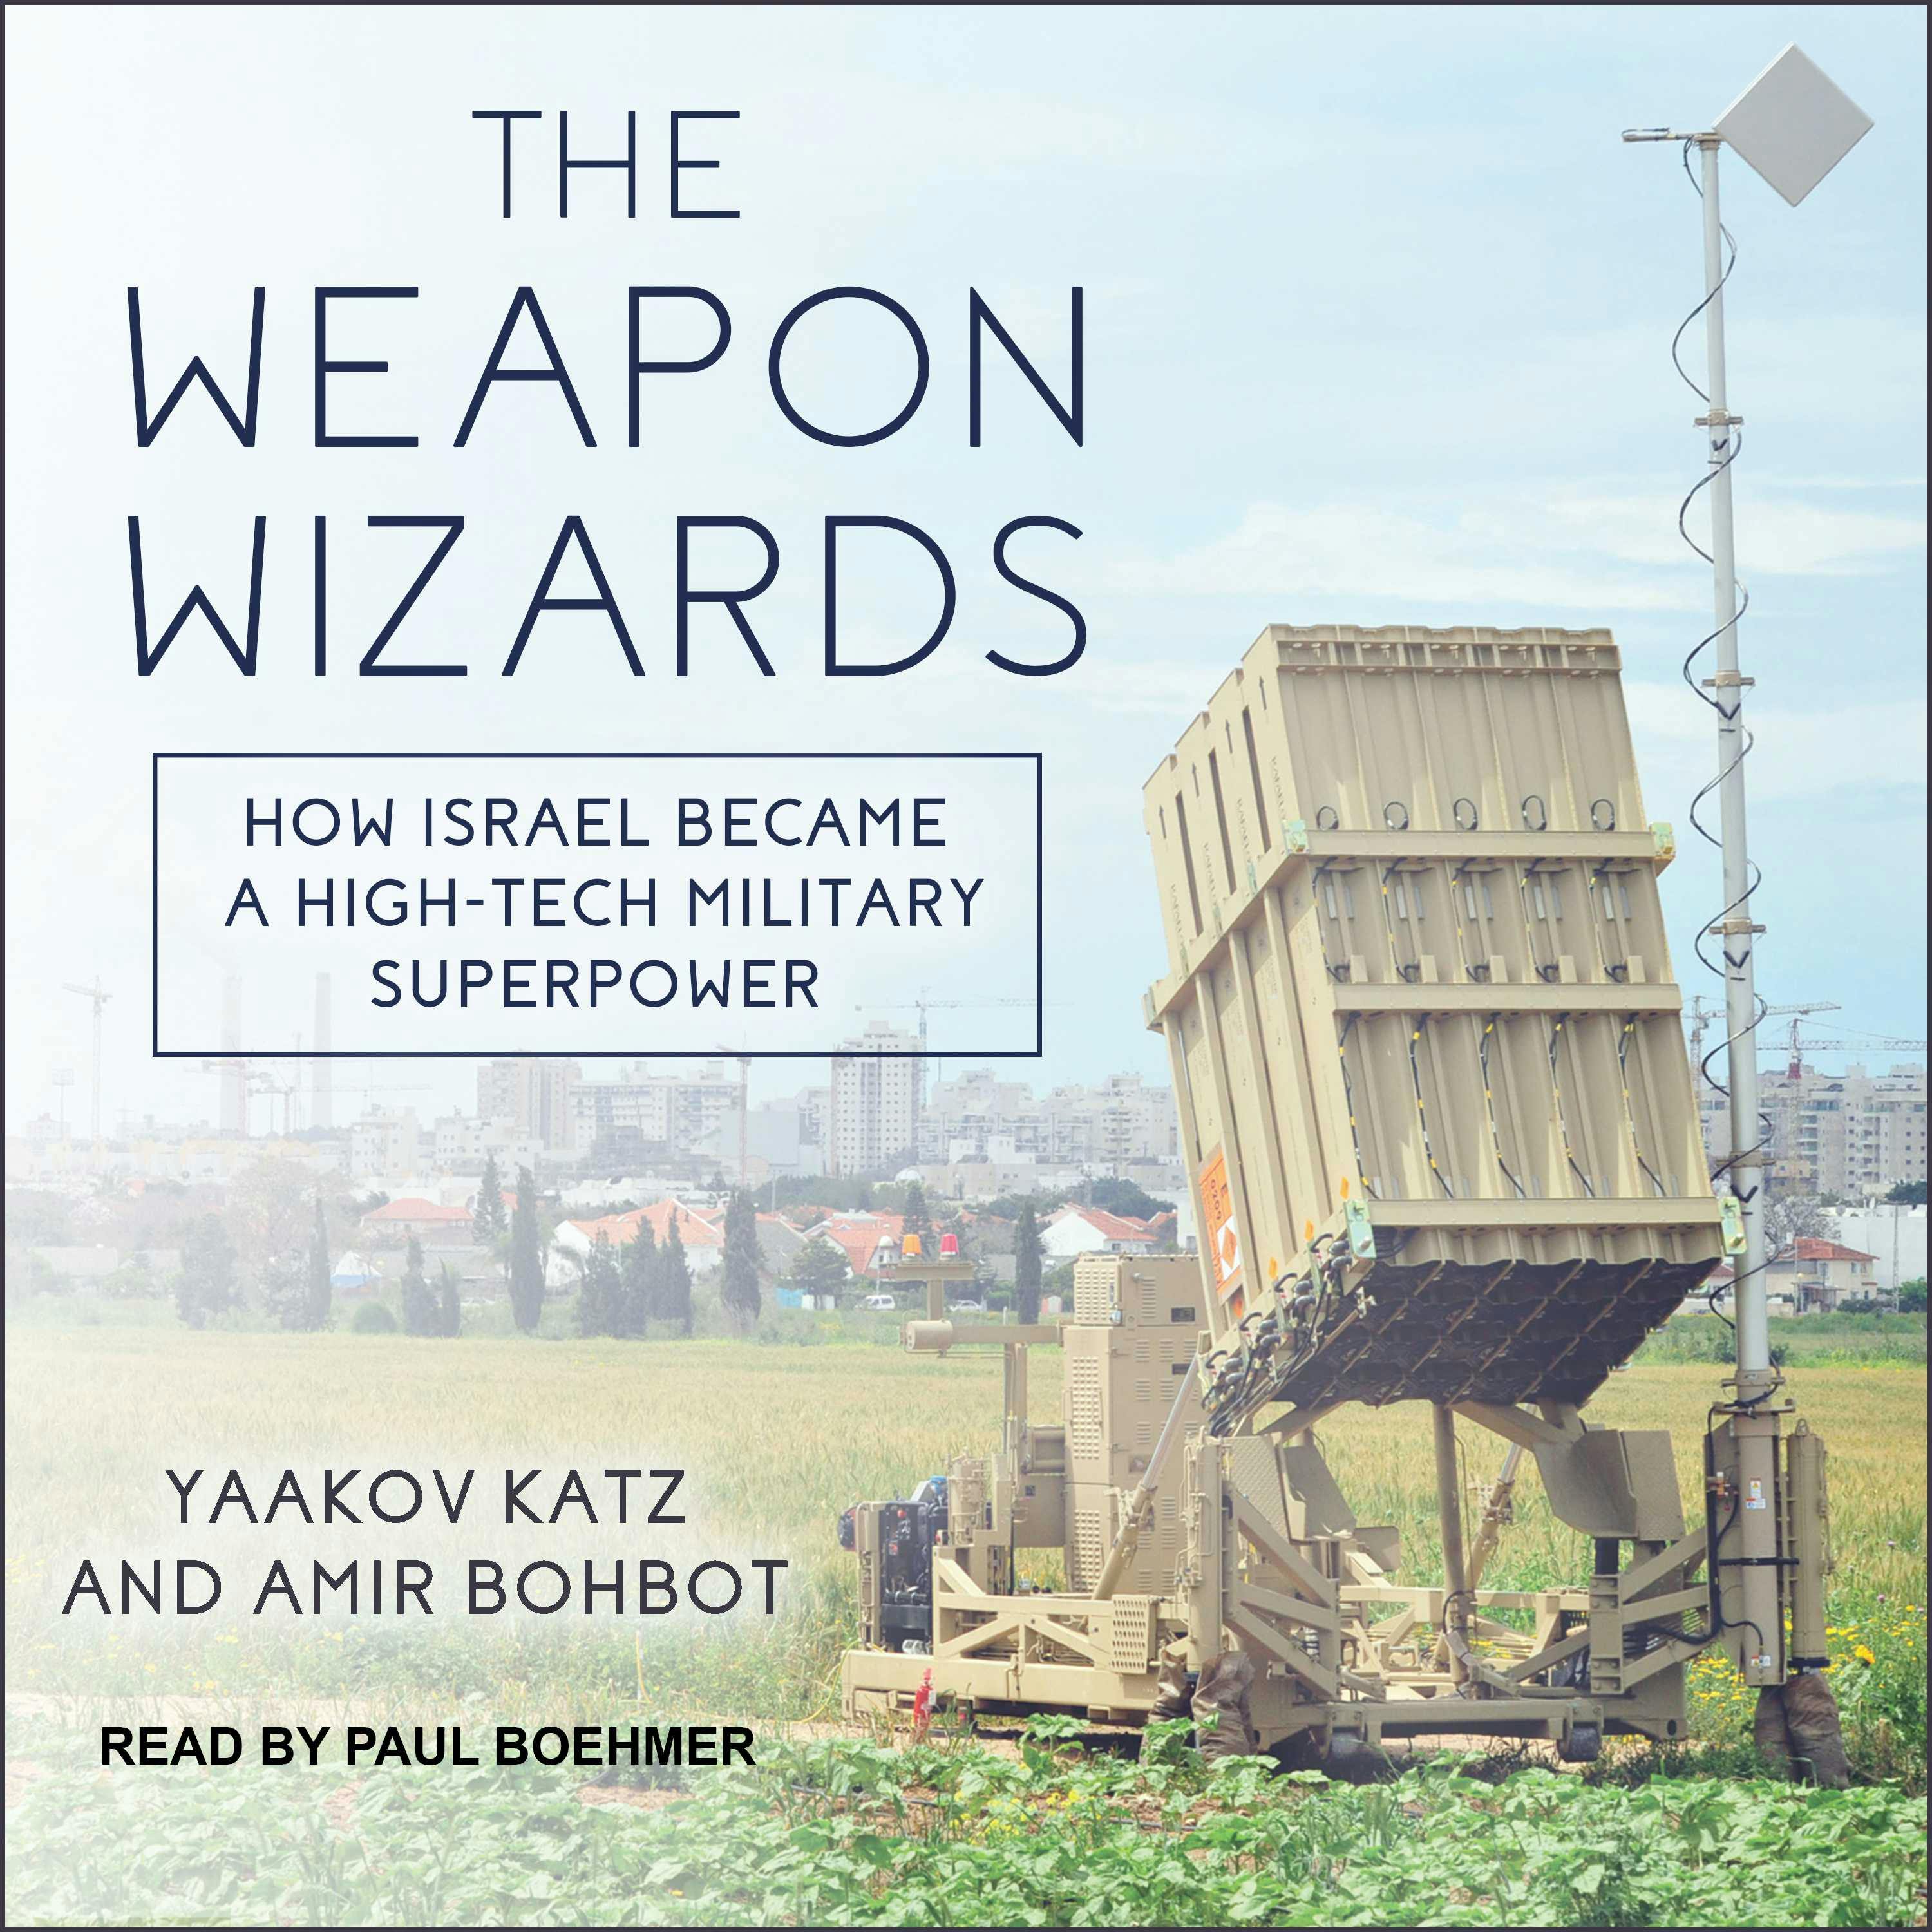 The Weapon Wizards: How Israel Became a High-Tech Military Superpower - Yaakov Katz, Amir Bohbot